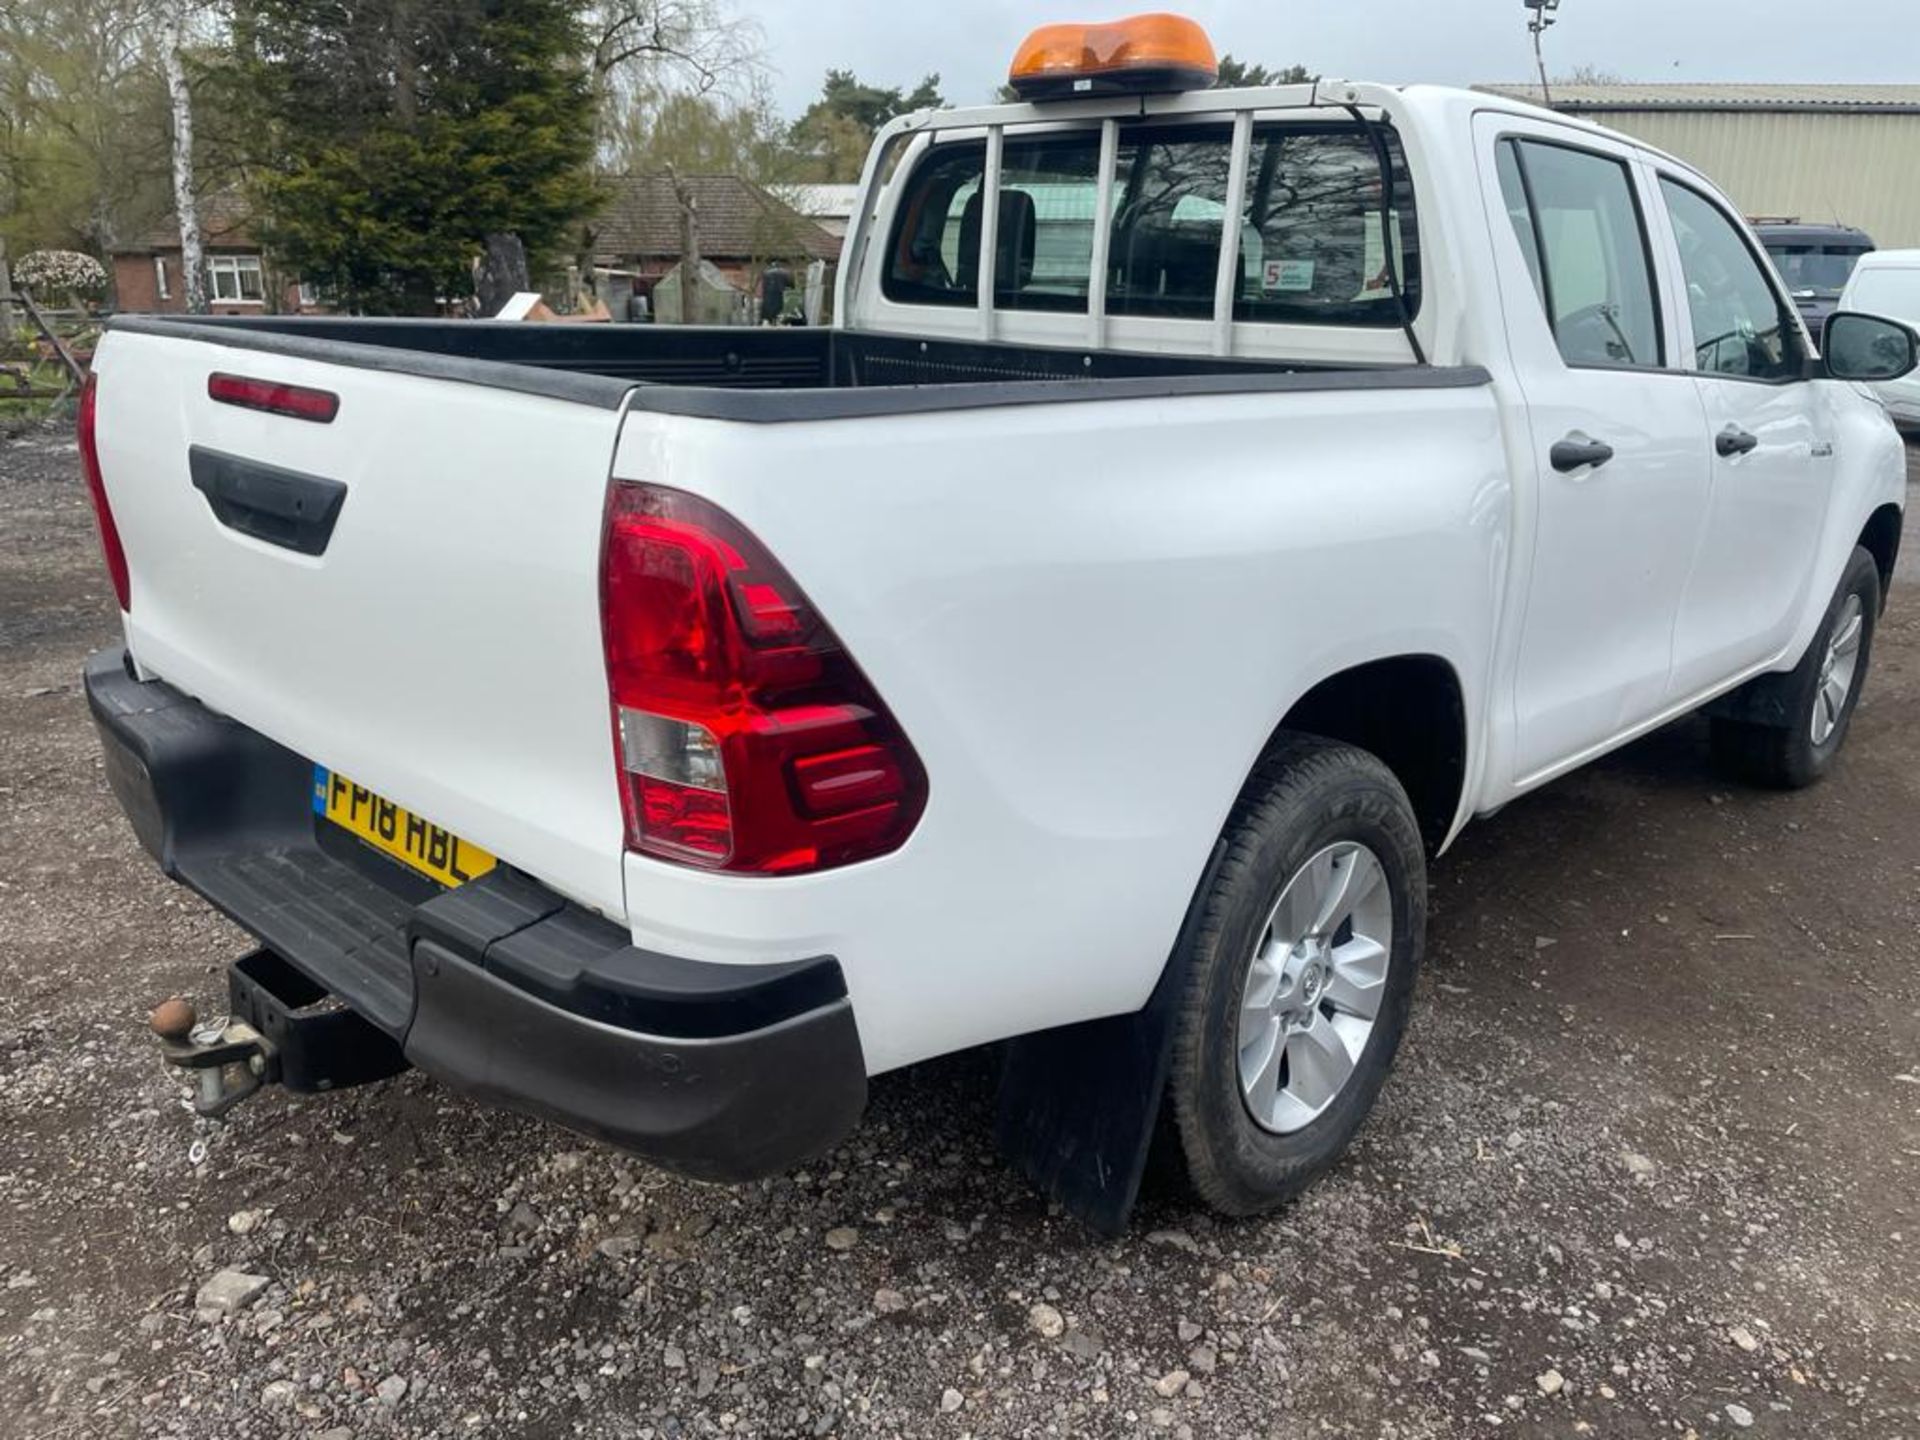 2018/18 REG TOYOTA HILUX ACTIVE D-4D 4WD DCB 2.4 DIESEL WHITE 4X4, SHOWING 1 FORMER KEEPER *PLUS VAT - Image 7 of 13